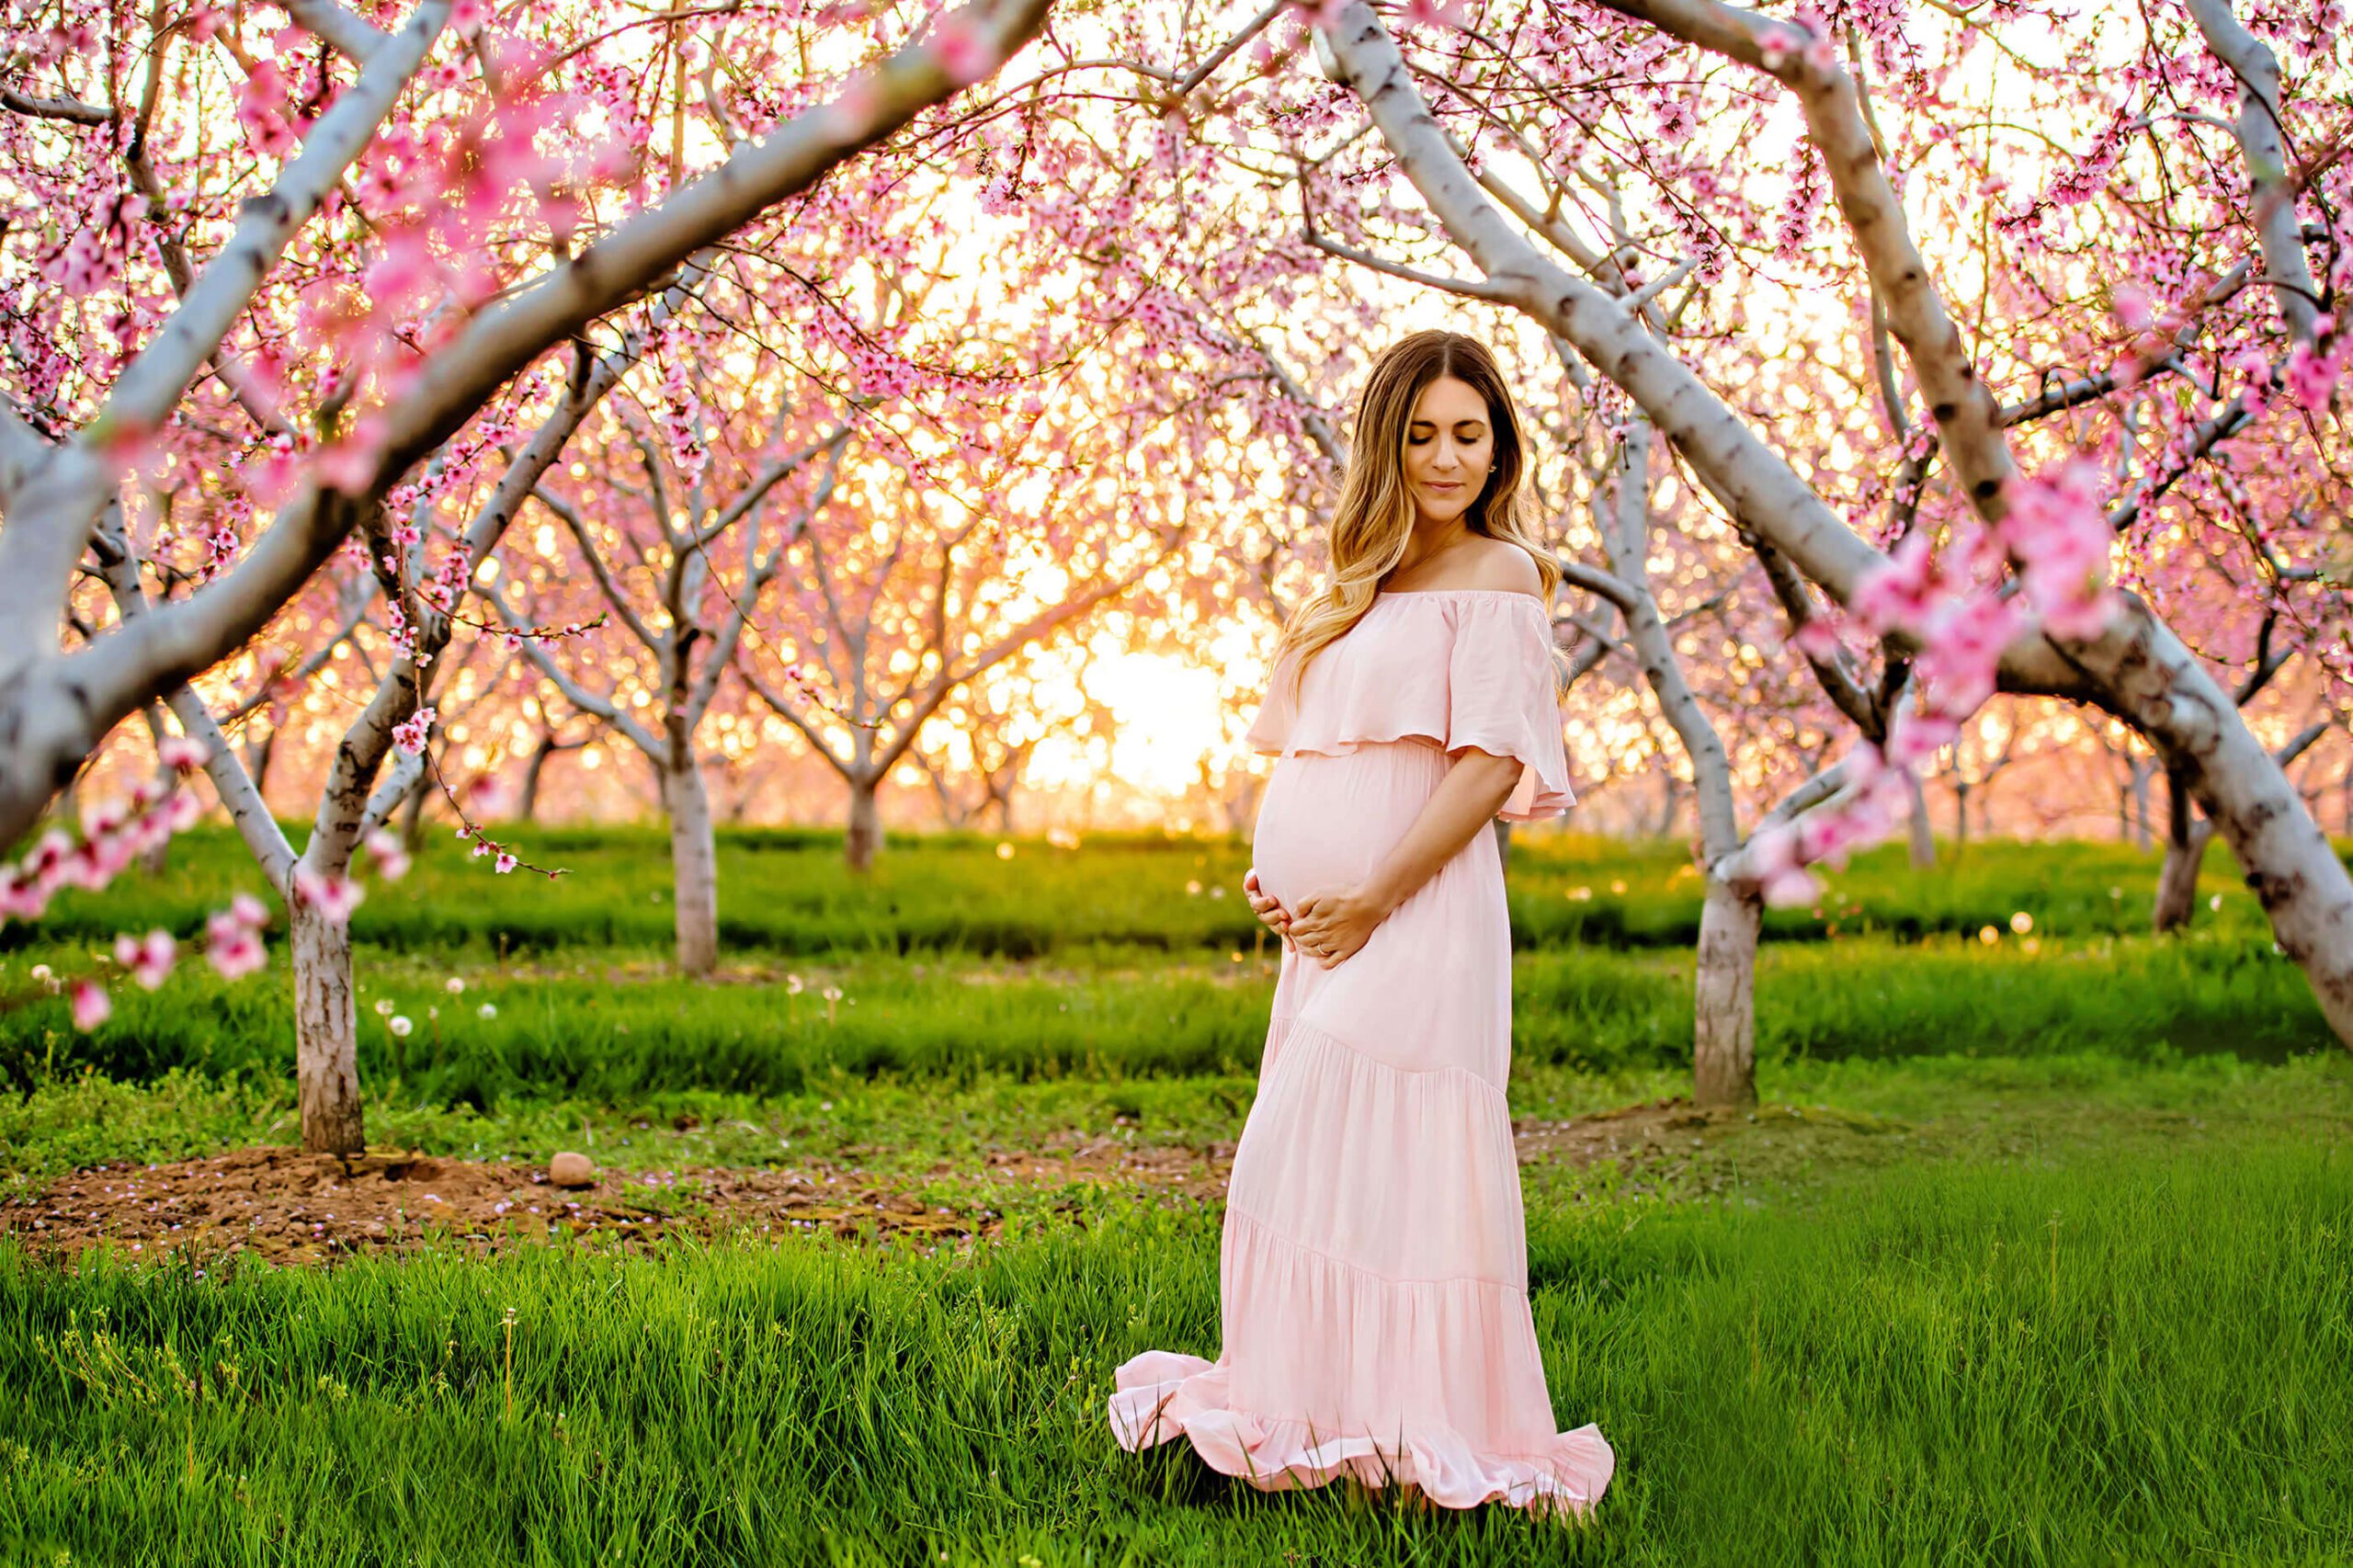 outdoor cherry blossom maternity session at sunset